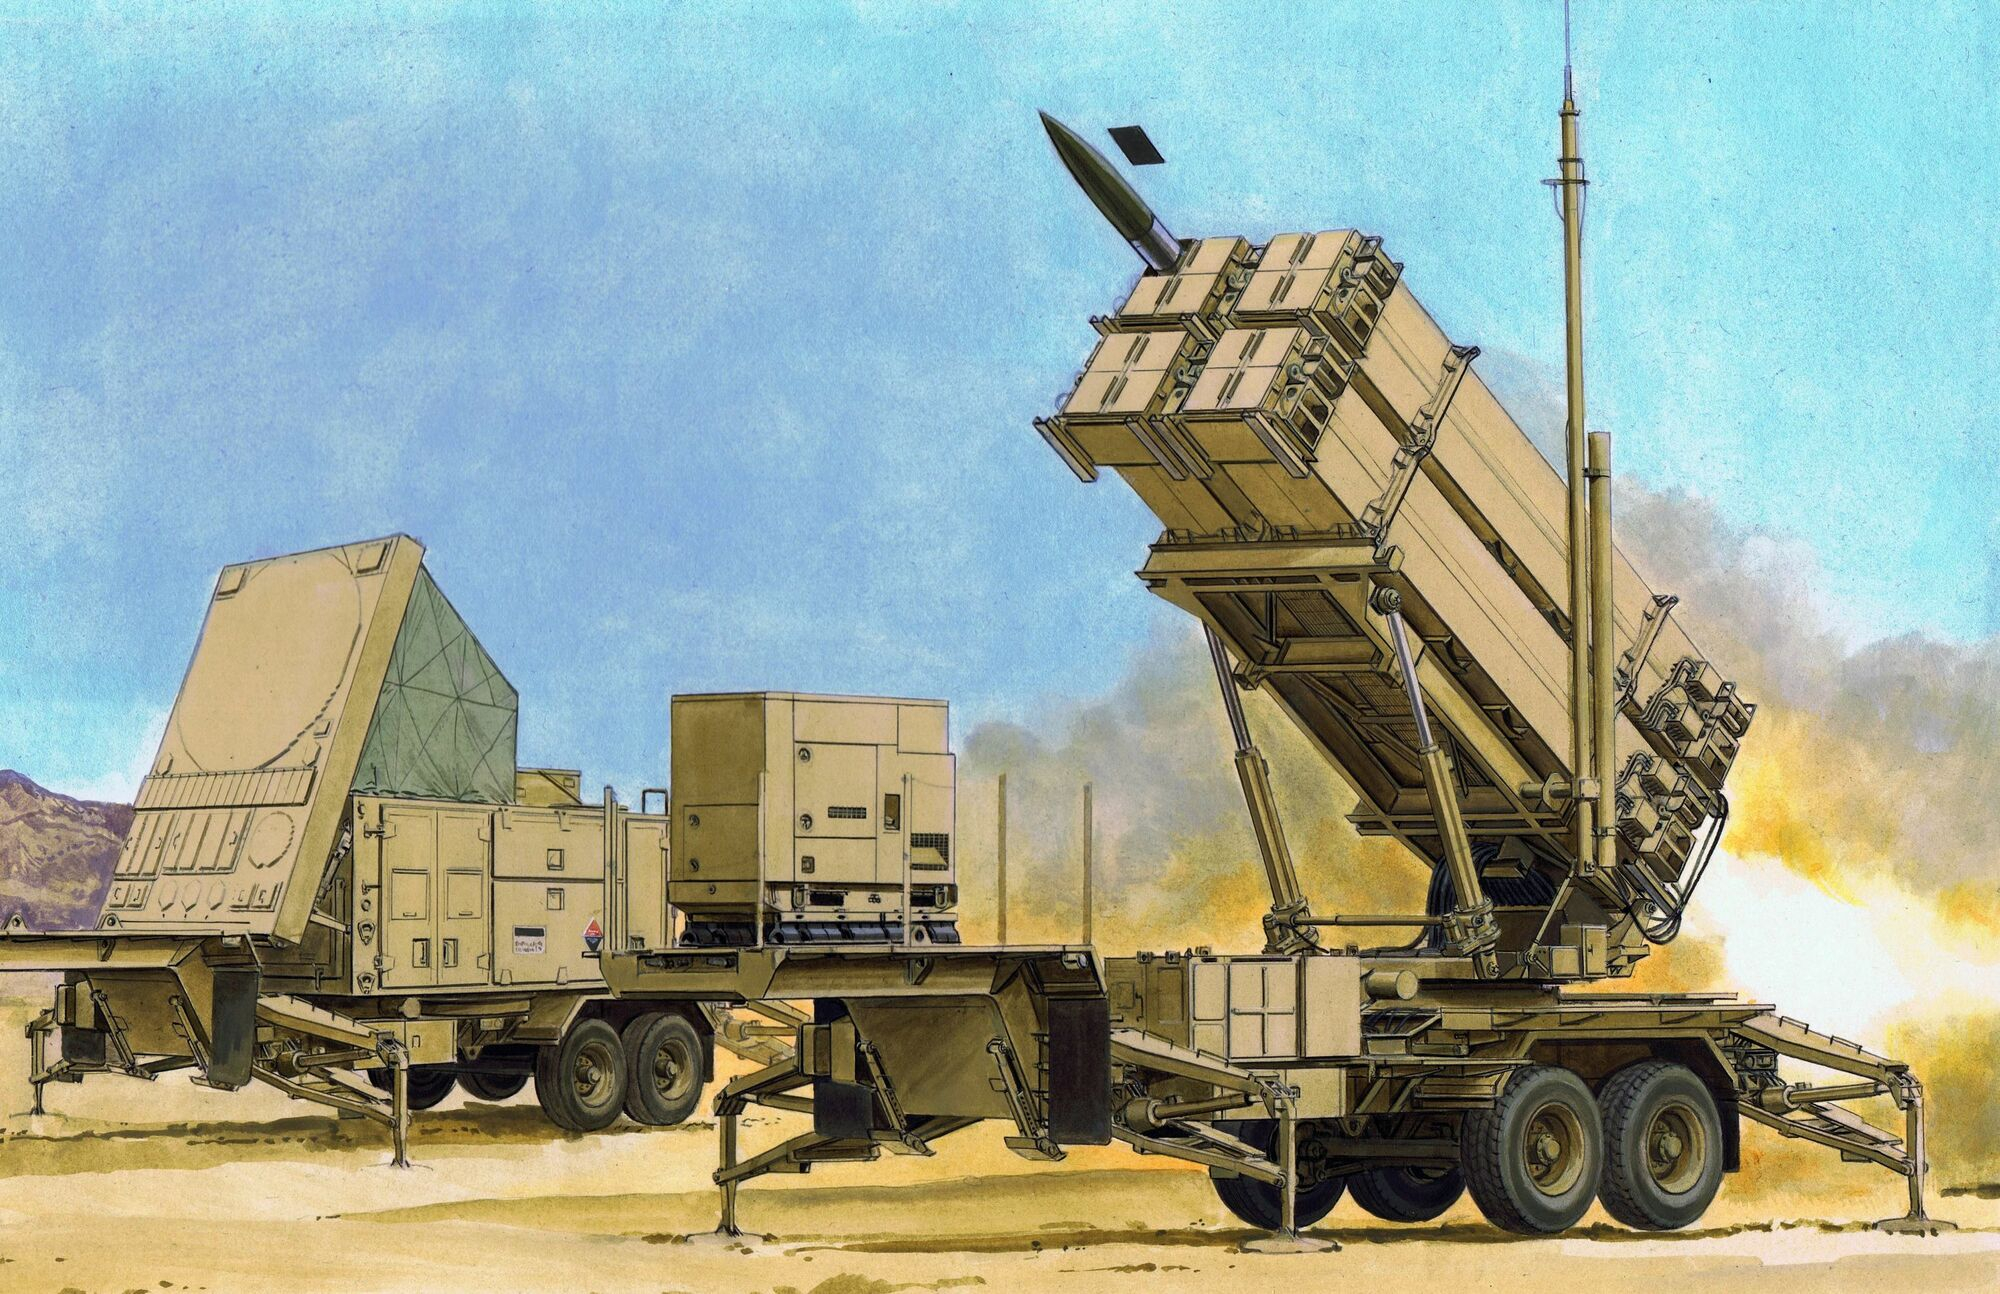 Dragon - 3563 - MIM-104F PATRIOT SURFACE-TO-AIR MISSILE SAM SYSTEM PAC-3 1:35